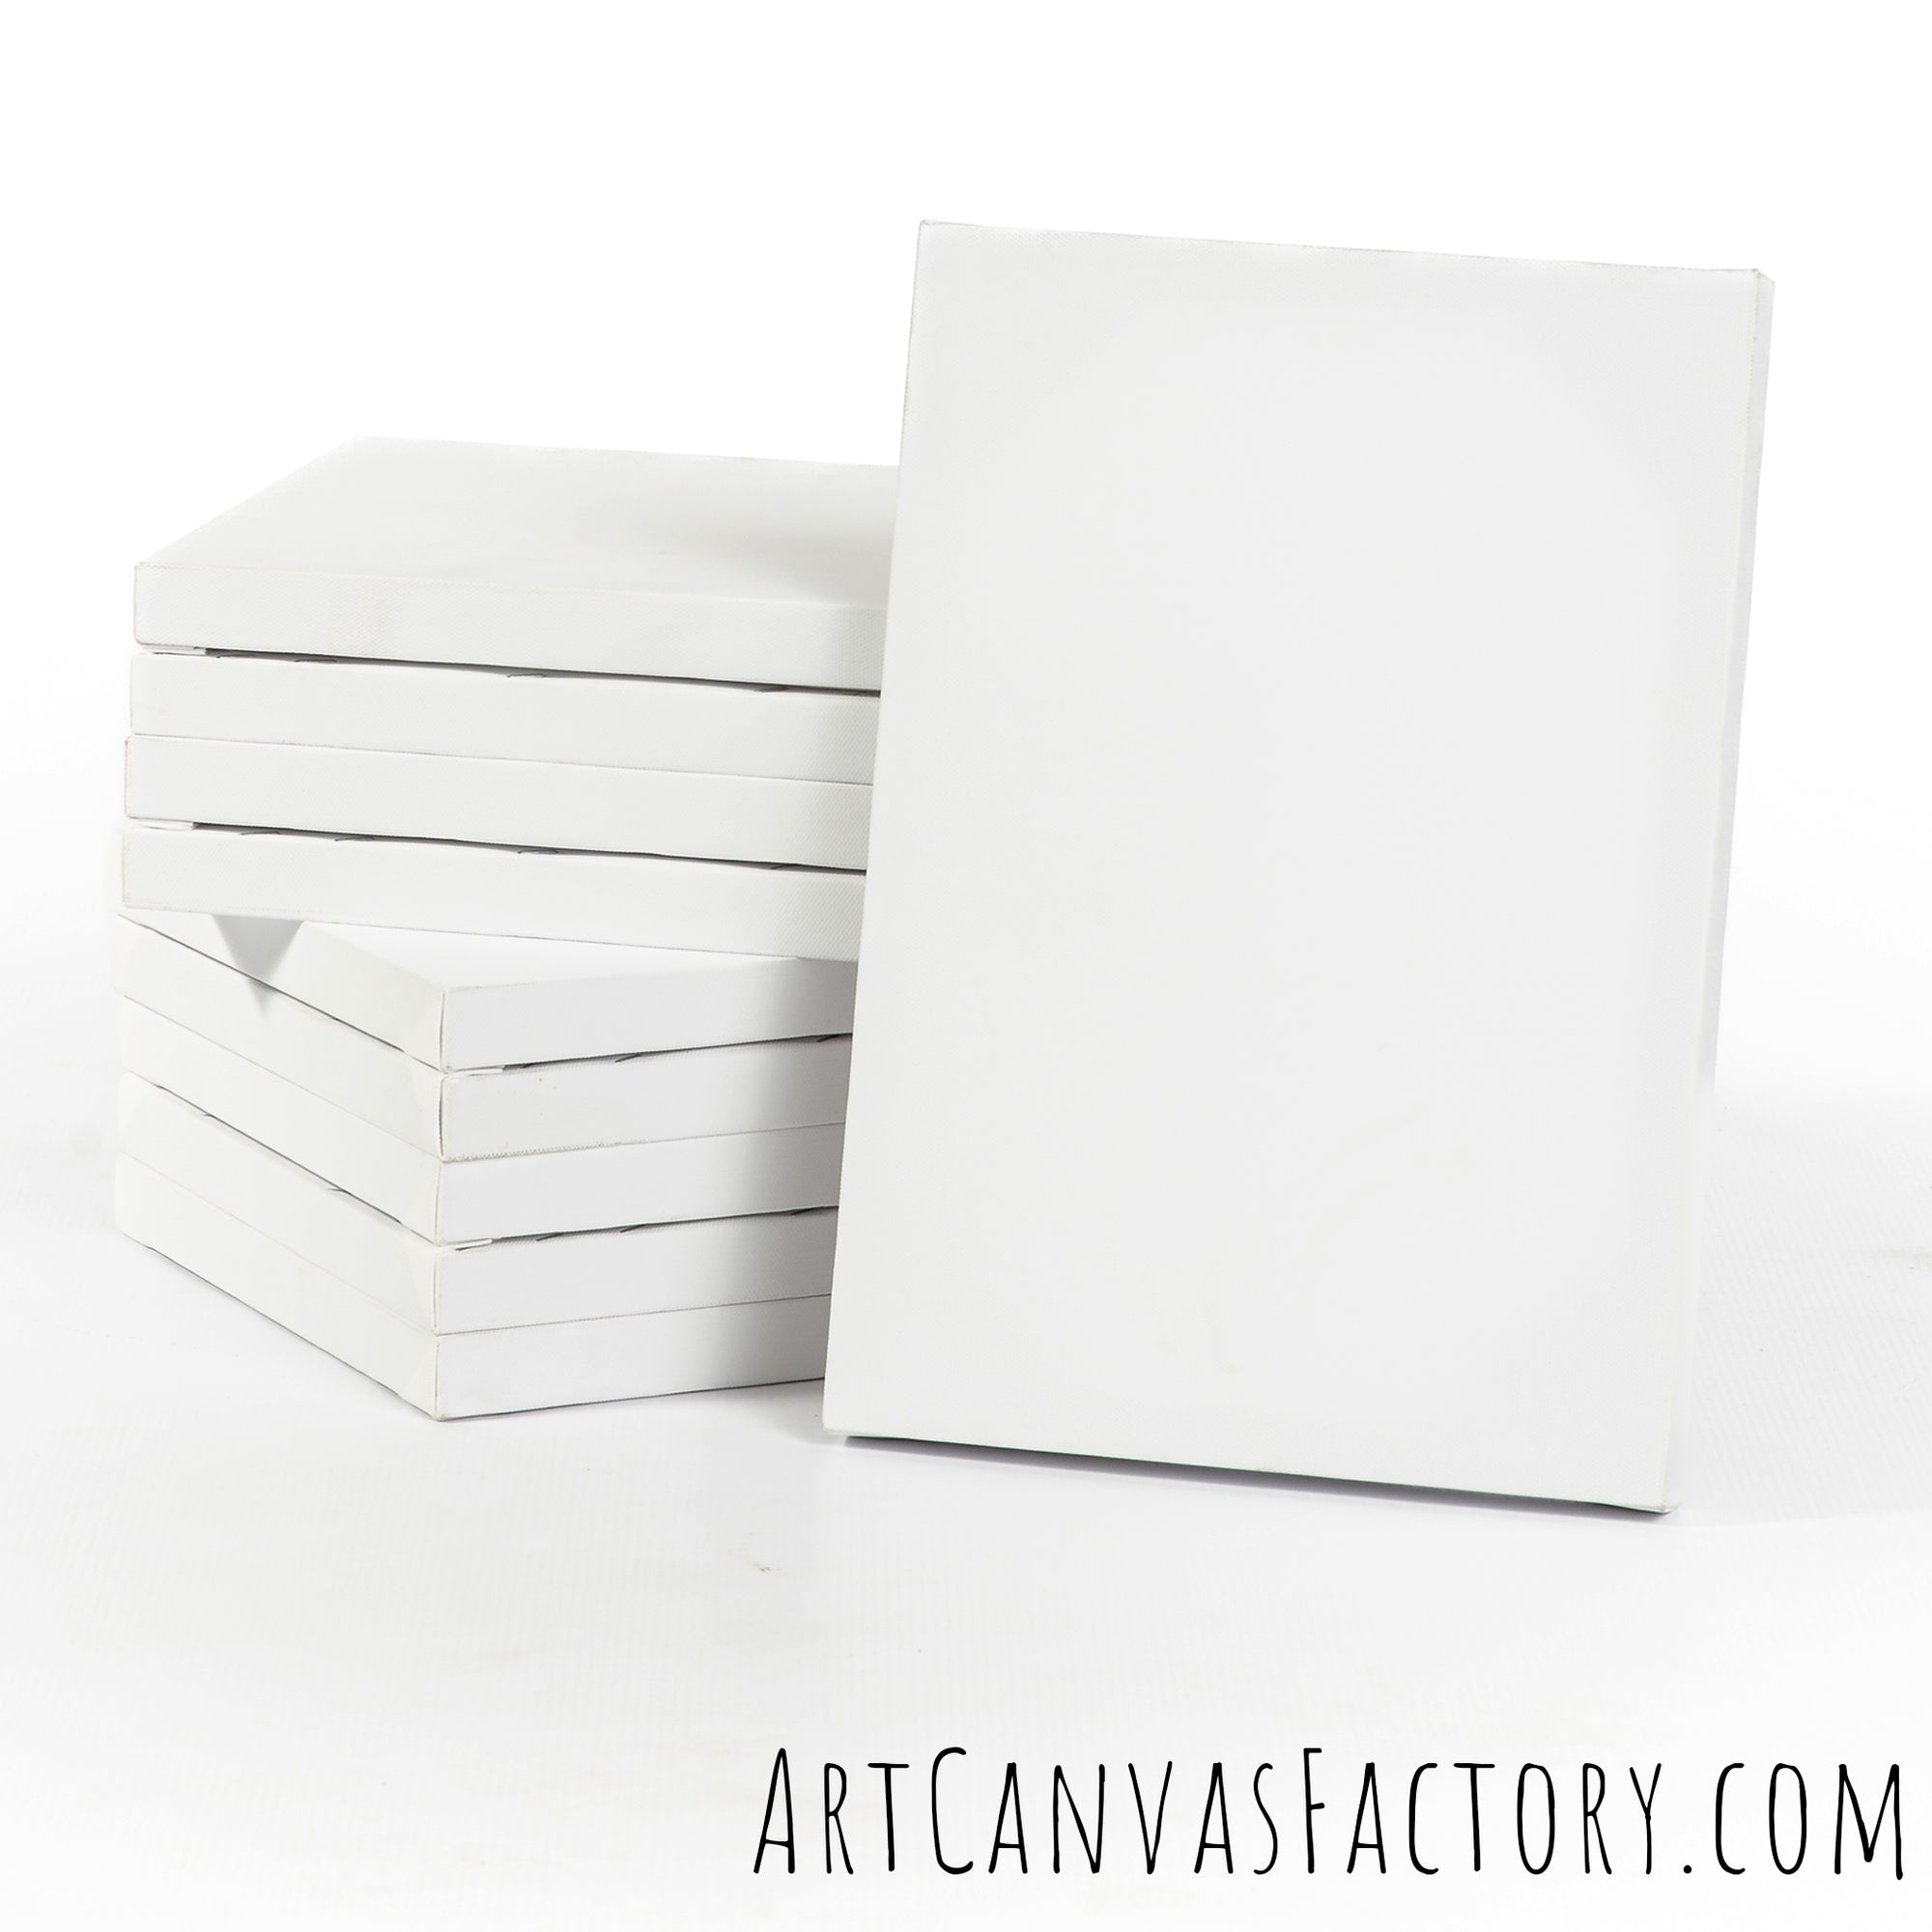 Pack of Assorted Sizes of Canvas